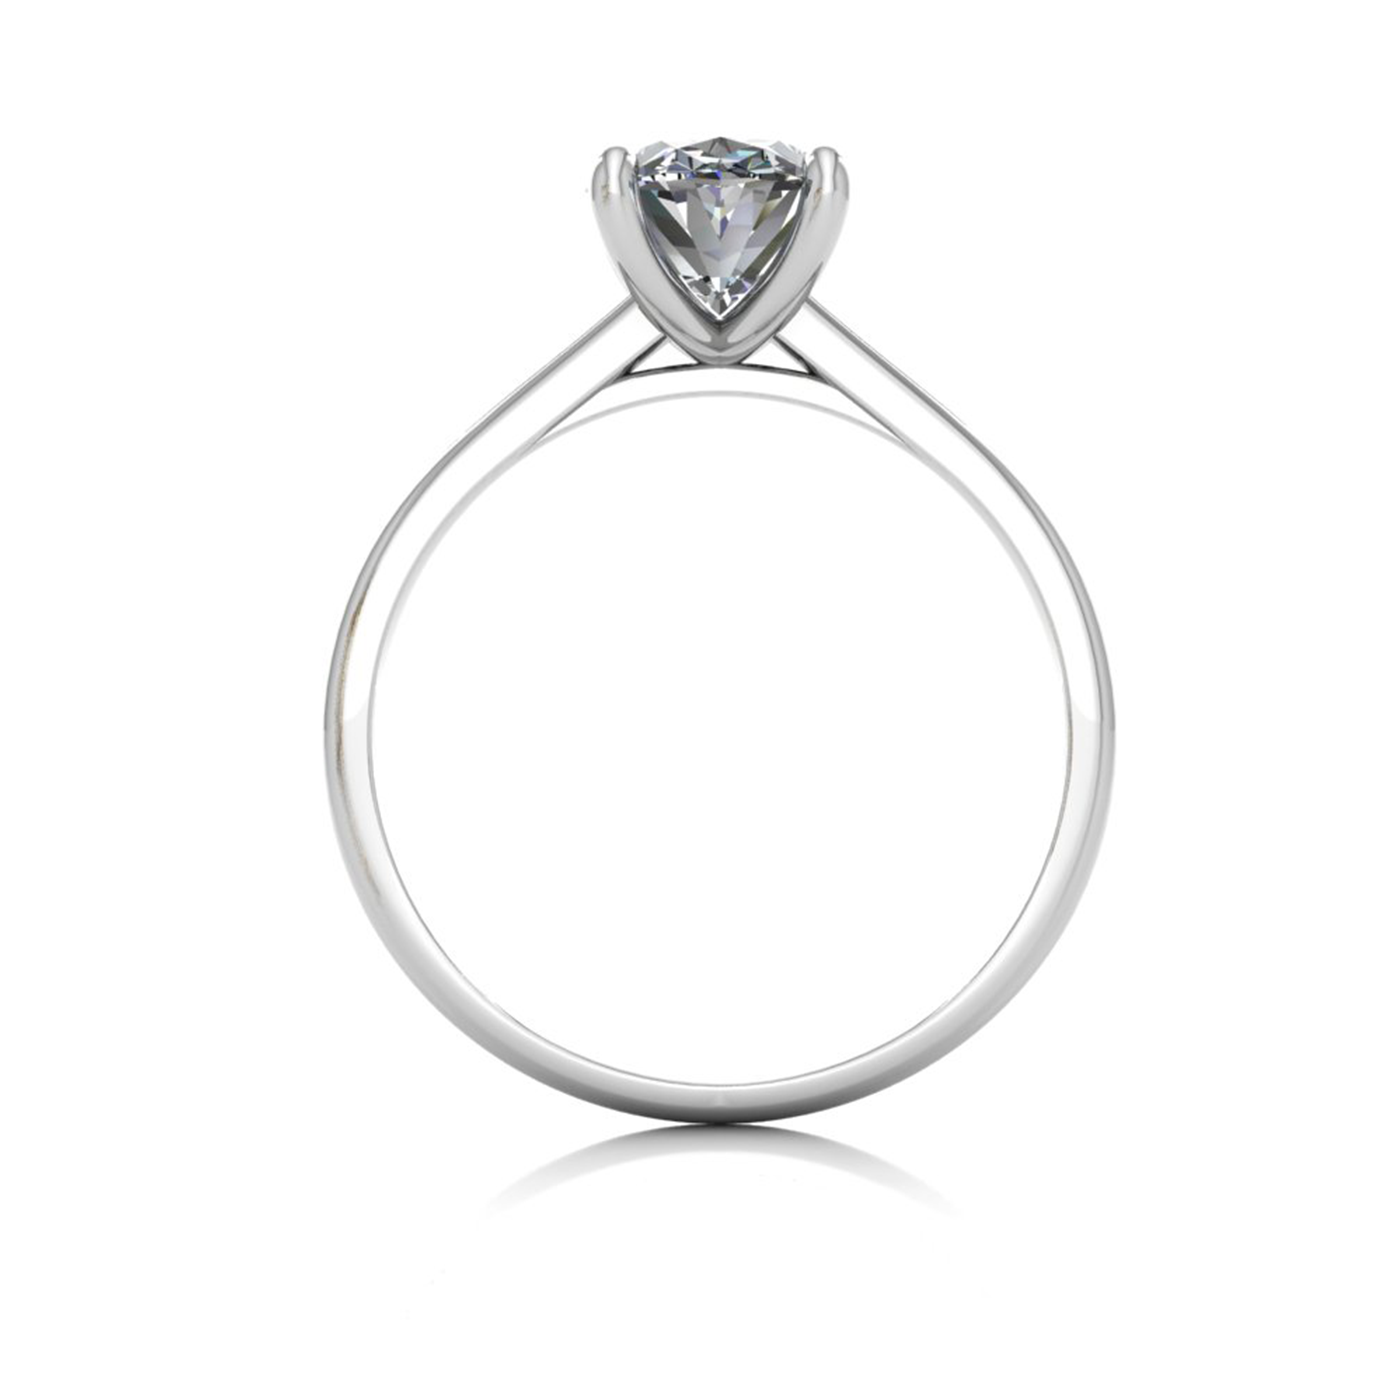 18k white gold  1,50 ct 4 prongs solitaire oval cut diamond engagement ring with whisper thin band